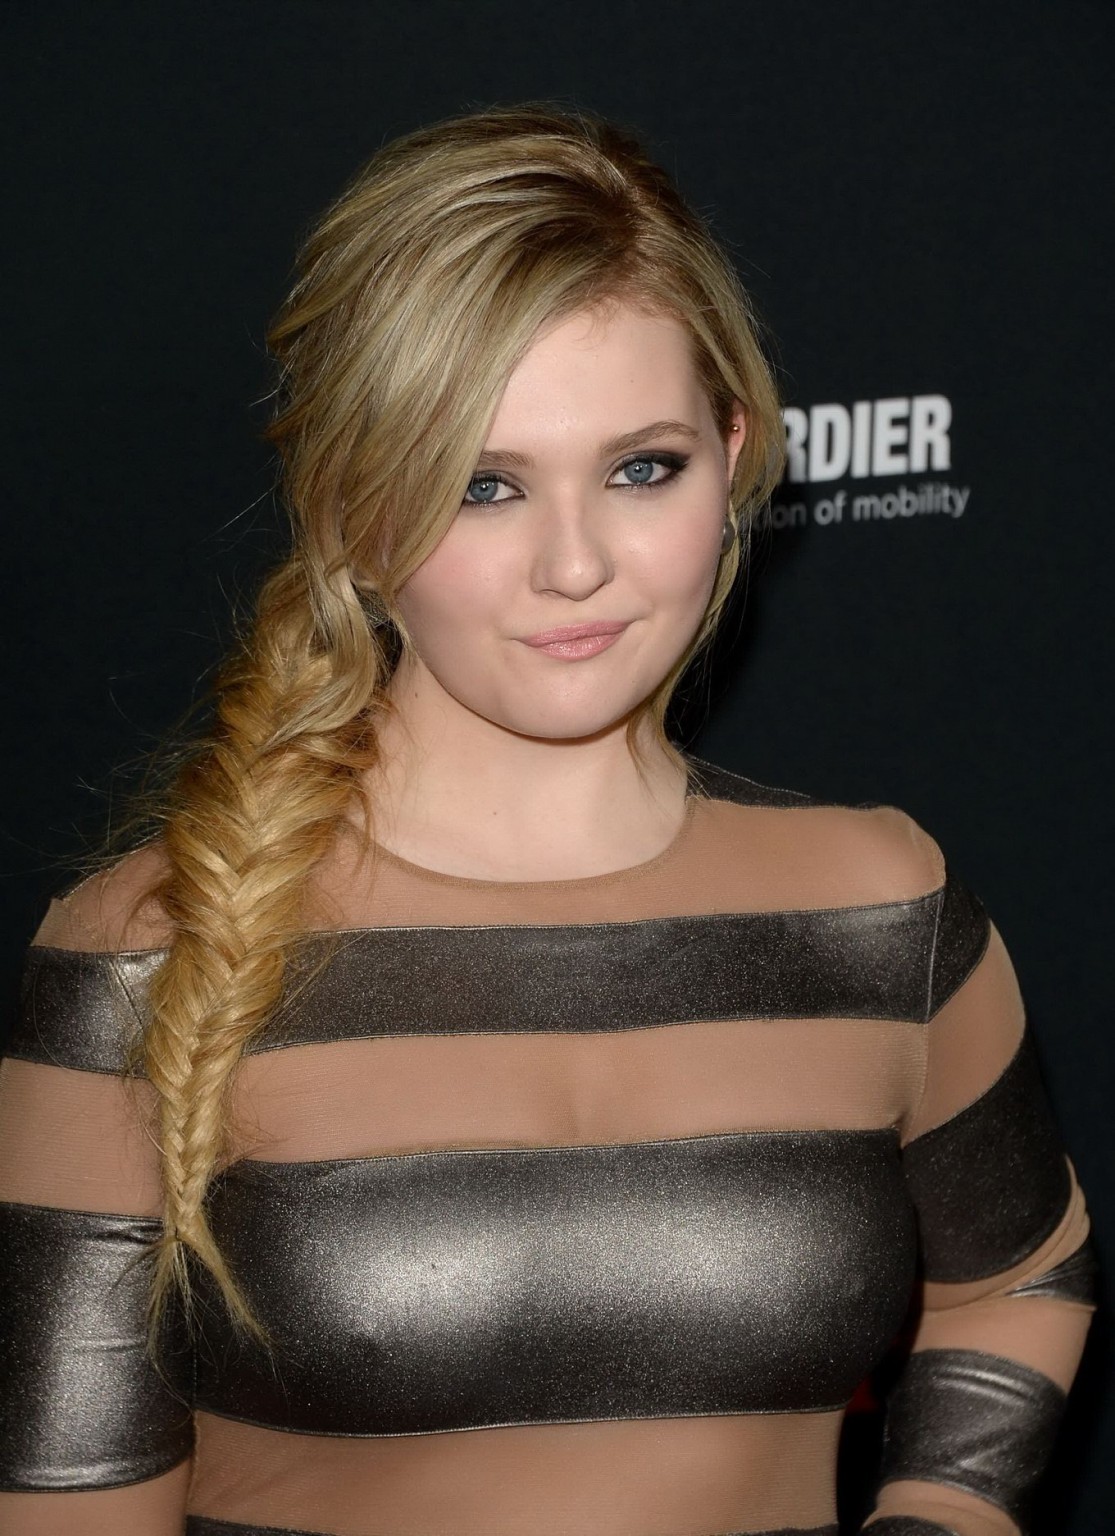 Abigail Breslin wearing striped partially see-through dress August-Osage County  #75209885